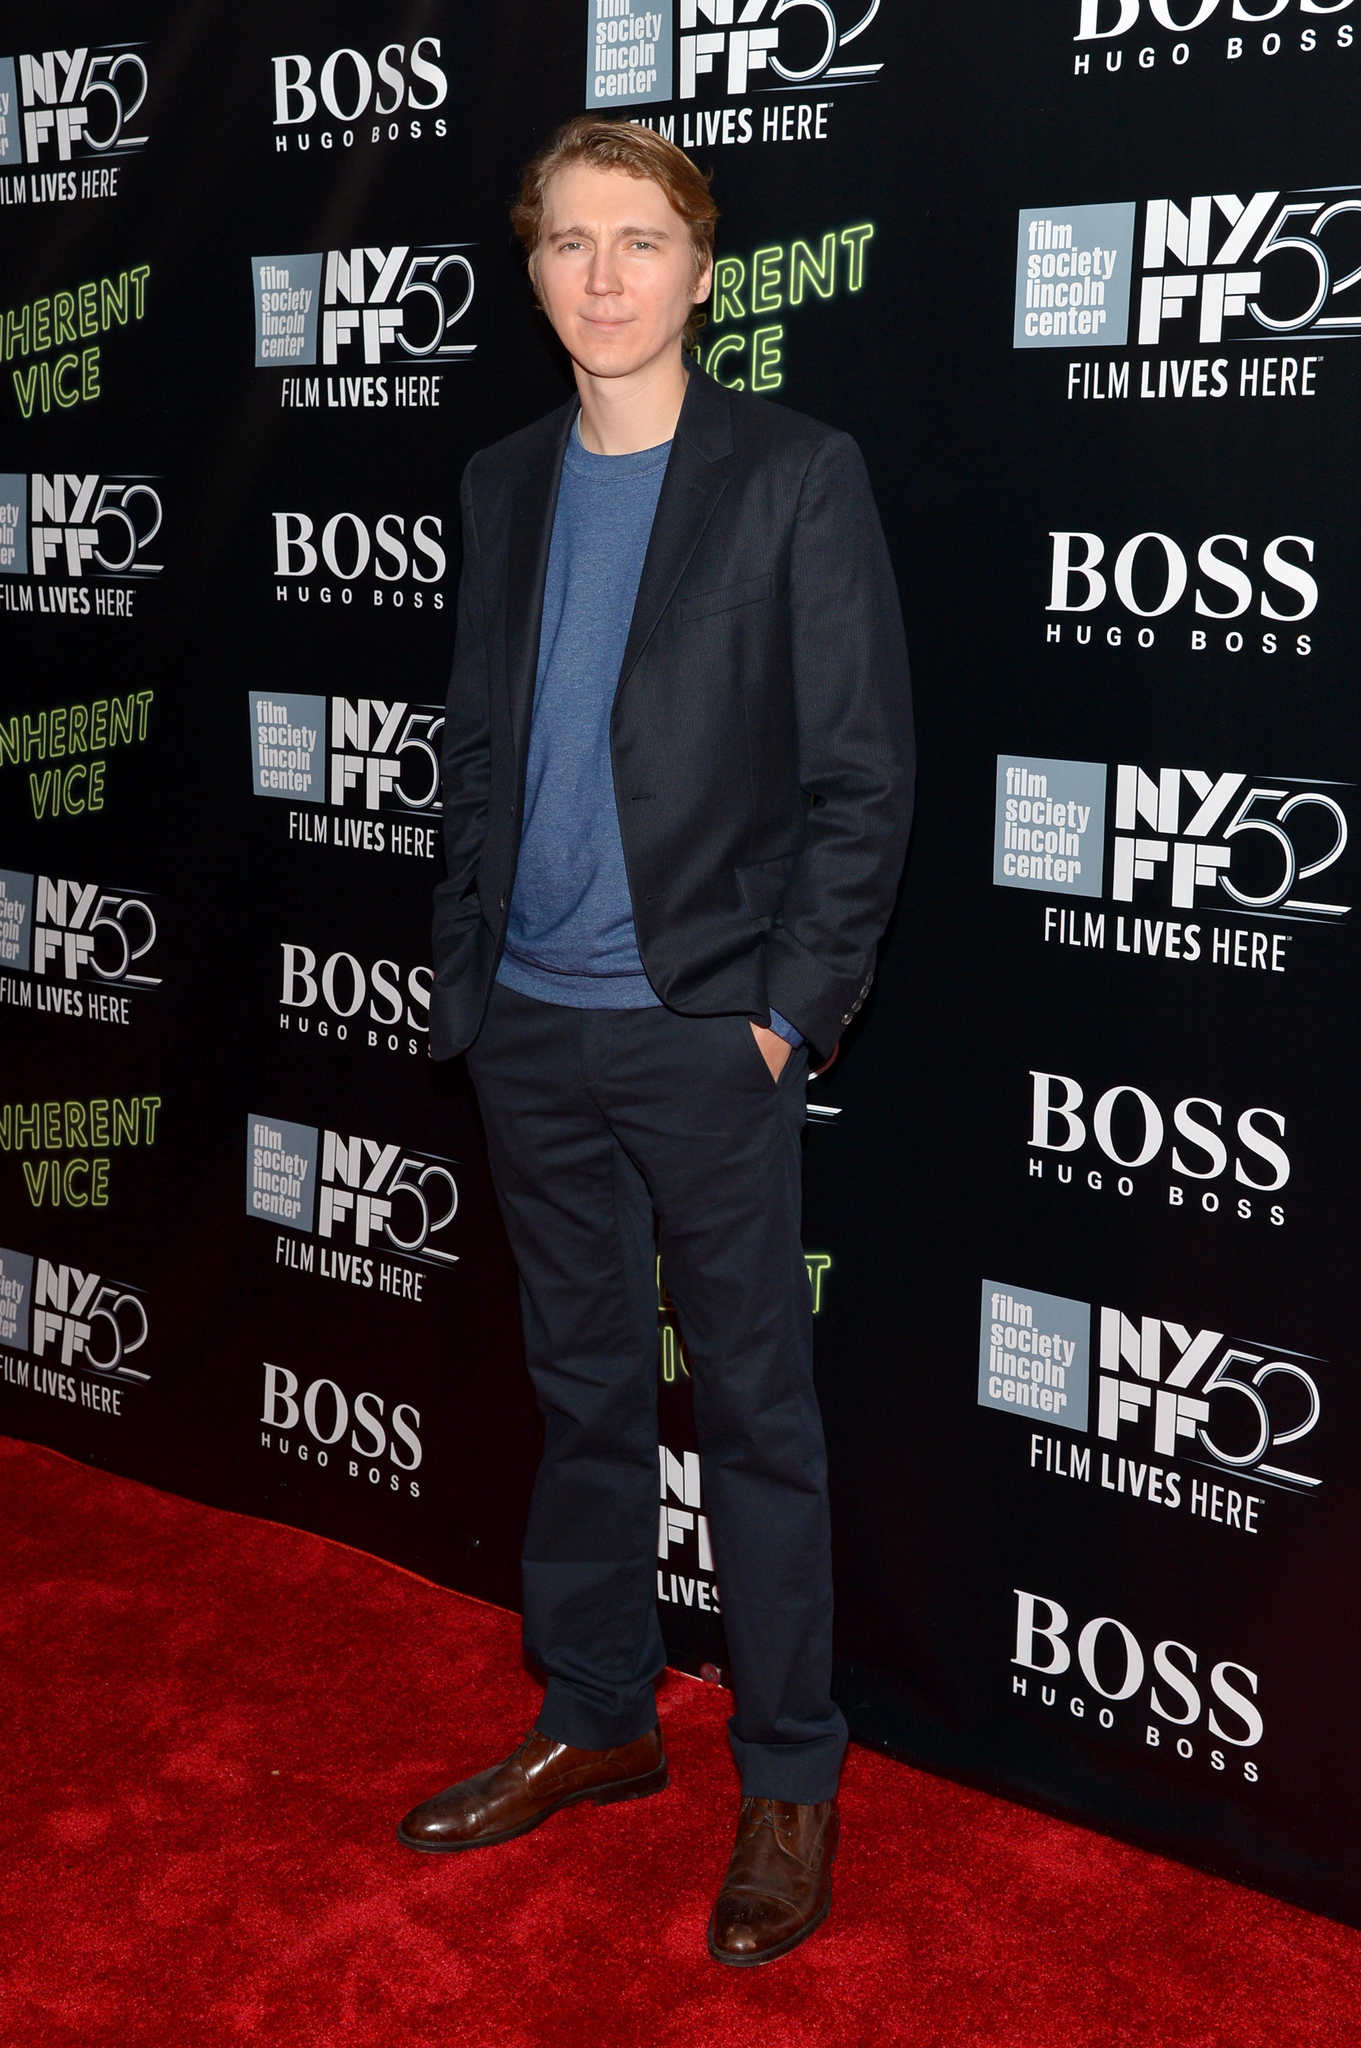 Paul Dano at event of Zmogiska silpnybe (2014)